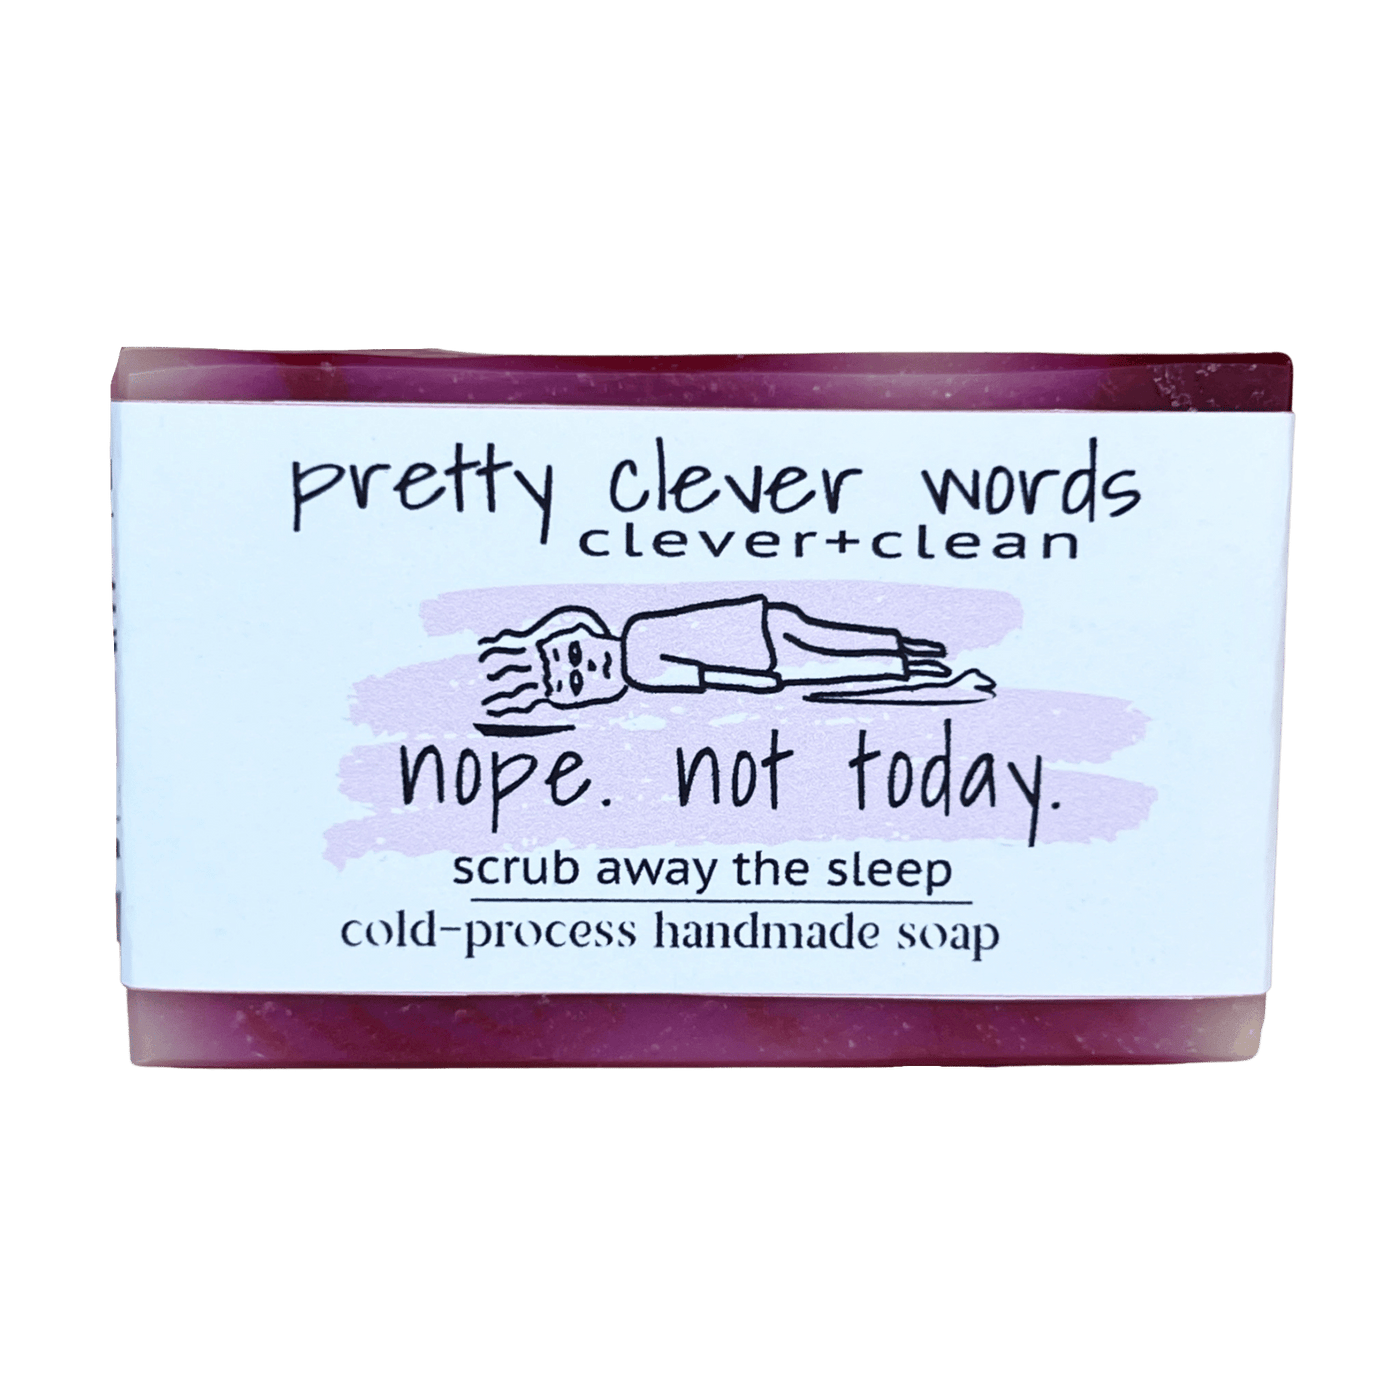 clever+clean plumeria bar soap - nope, not today